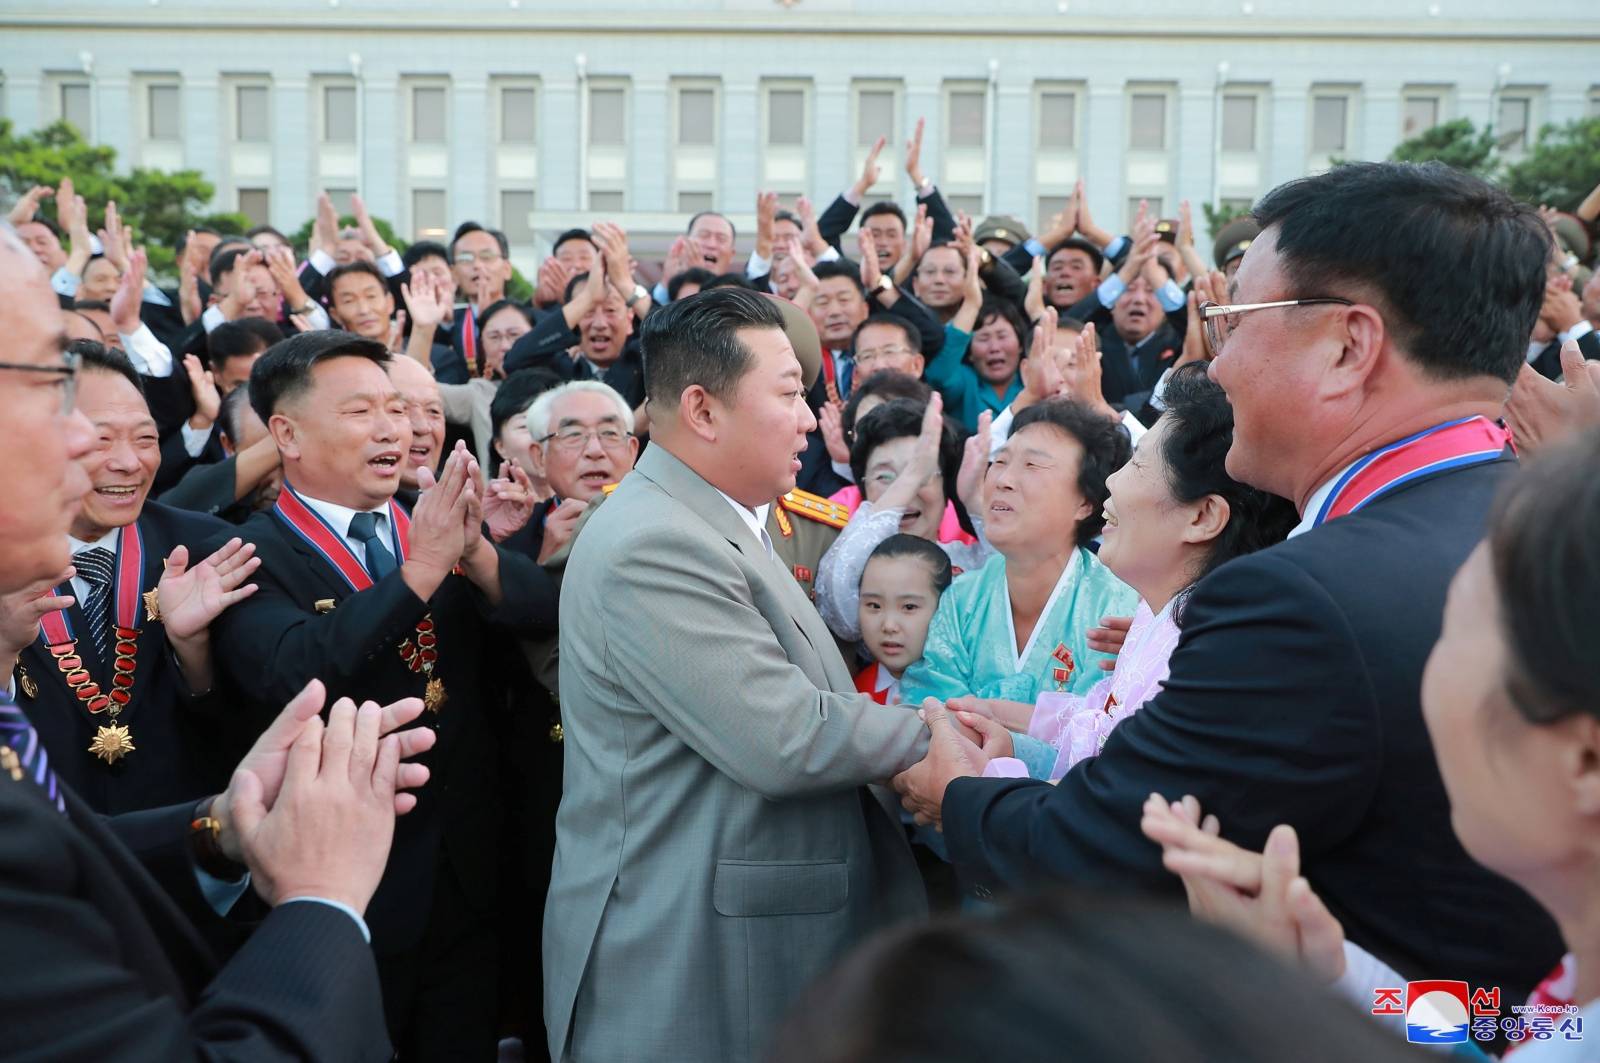 North Korean leader Kim Jong Un greets people during an event to mark the 73rd founding anniversary of North Korea in Pyongyang